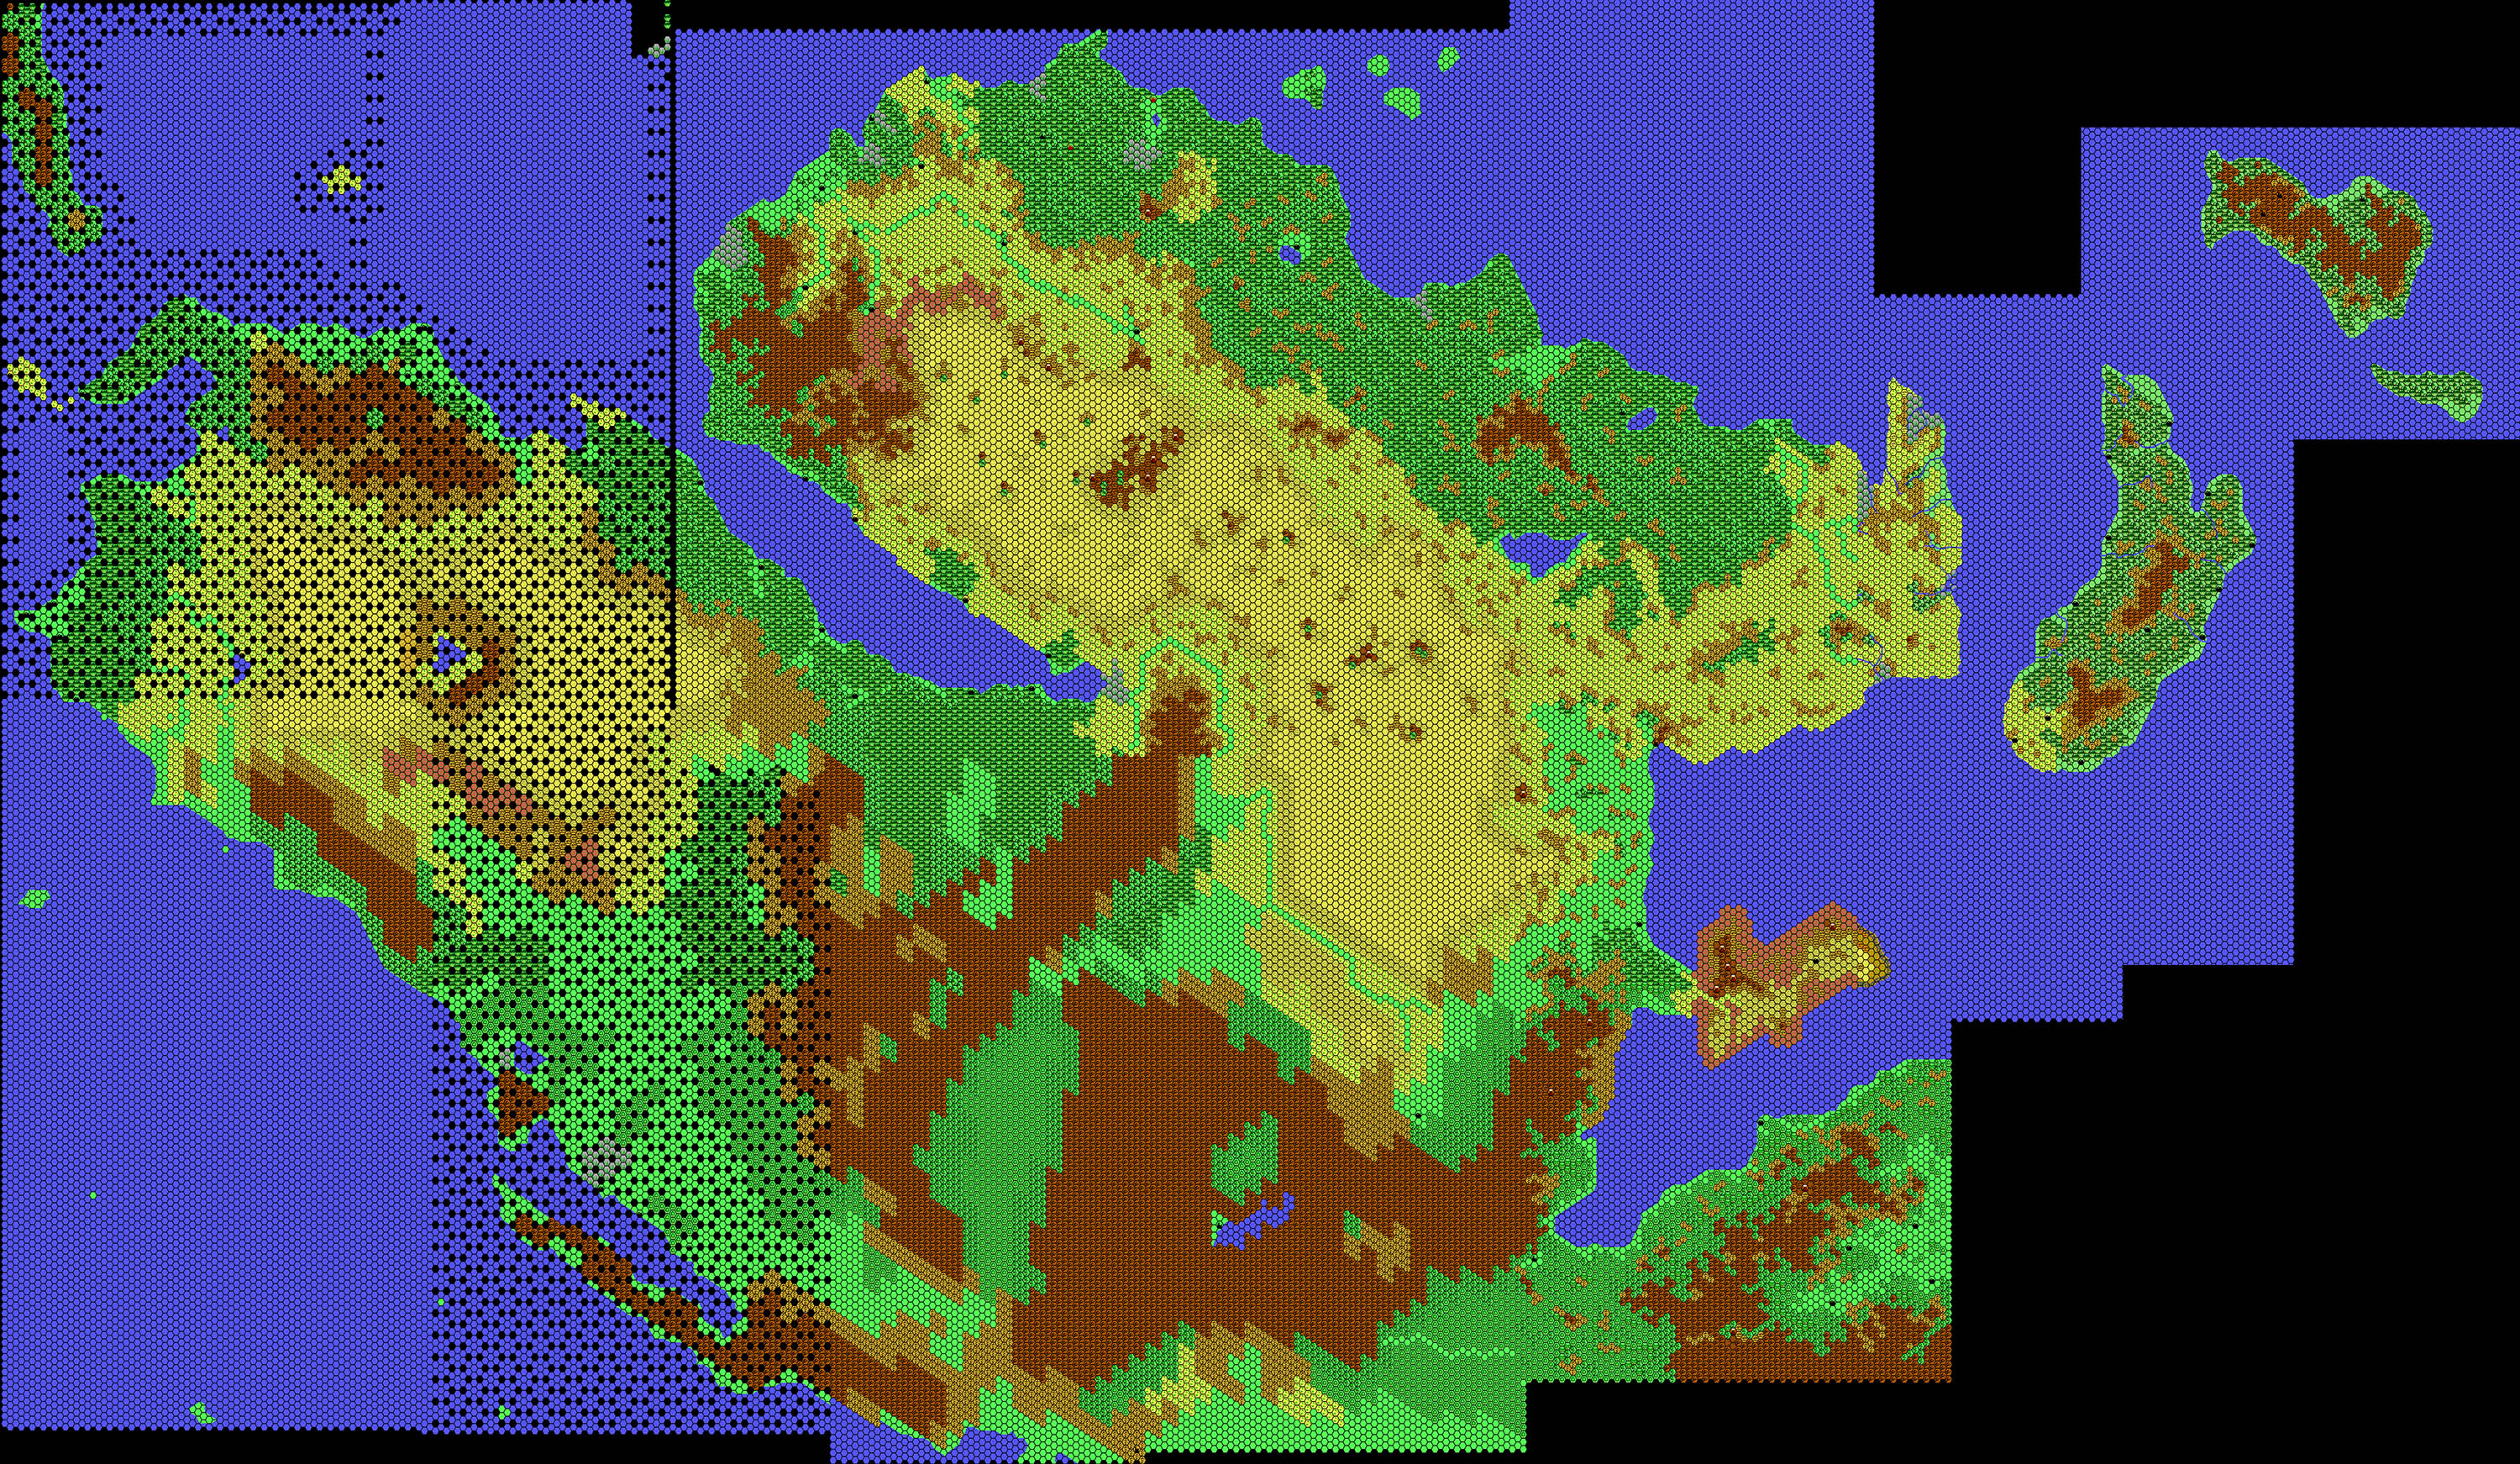 Work-in-progress map of Davania, 24 miles per hex by Thibault Sarlat, March-May 2001 (Combined by Thorfinn Tait, October 2021)